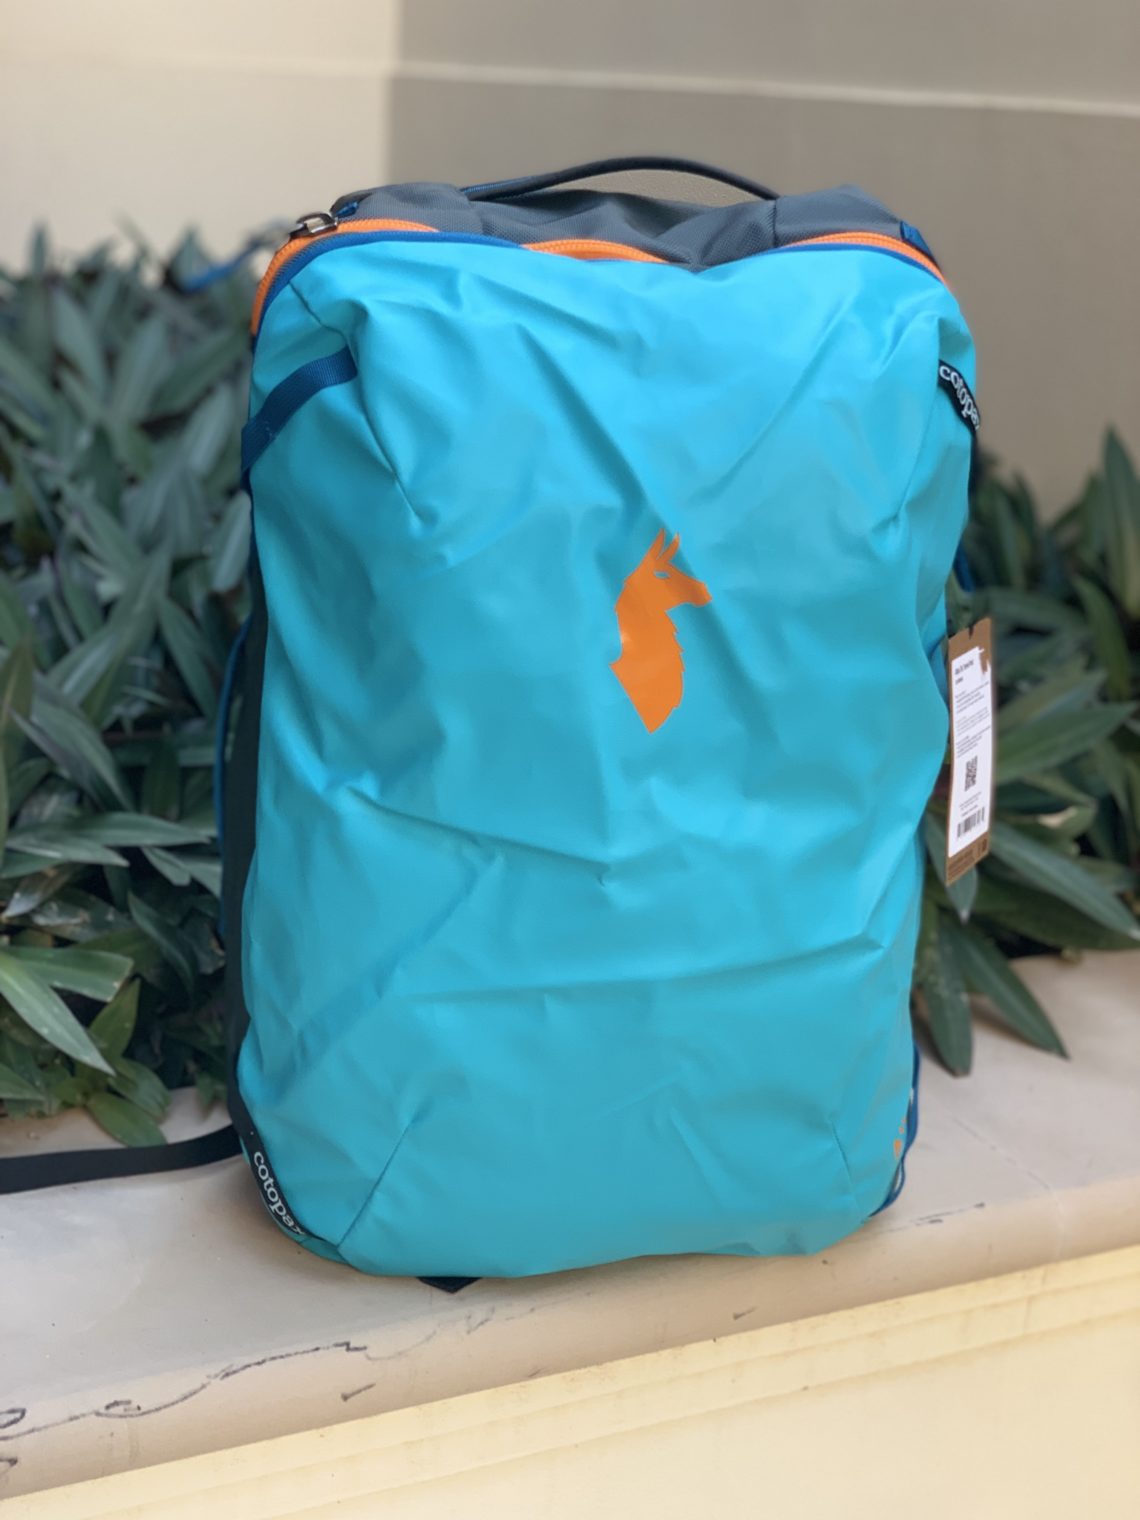 The Best From Our Tests: A Review Of Cotopaxi's Allpa 35L Travel ...